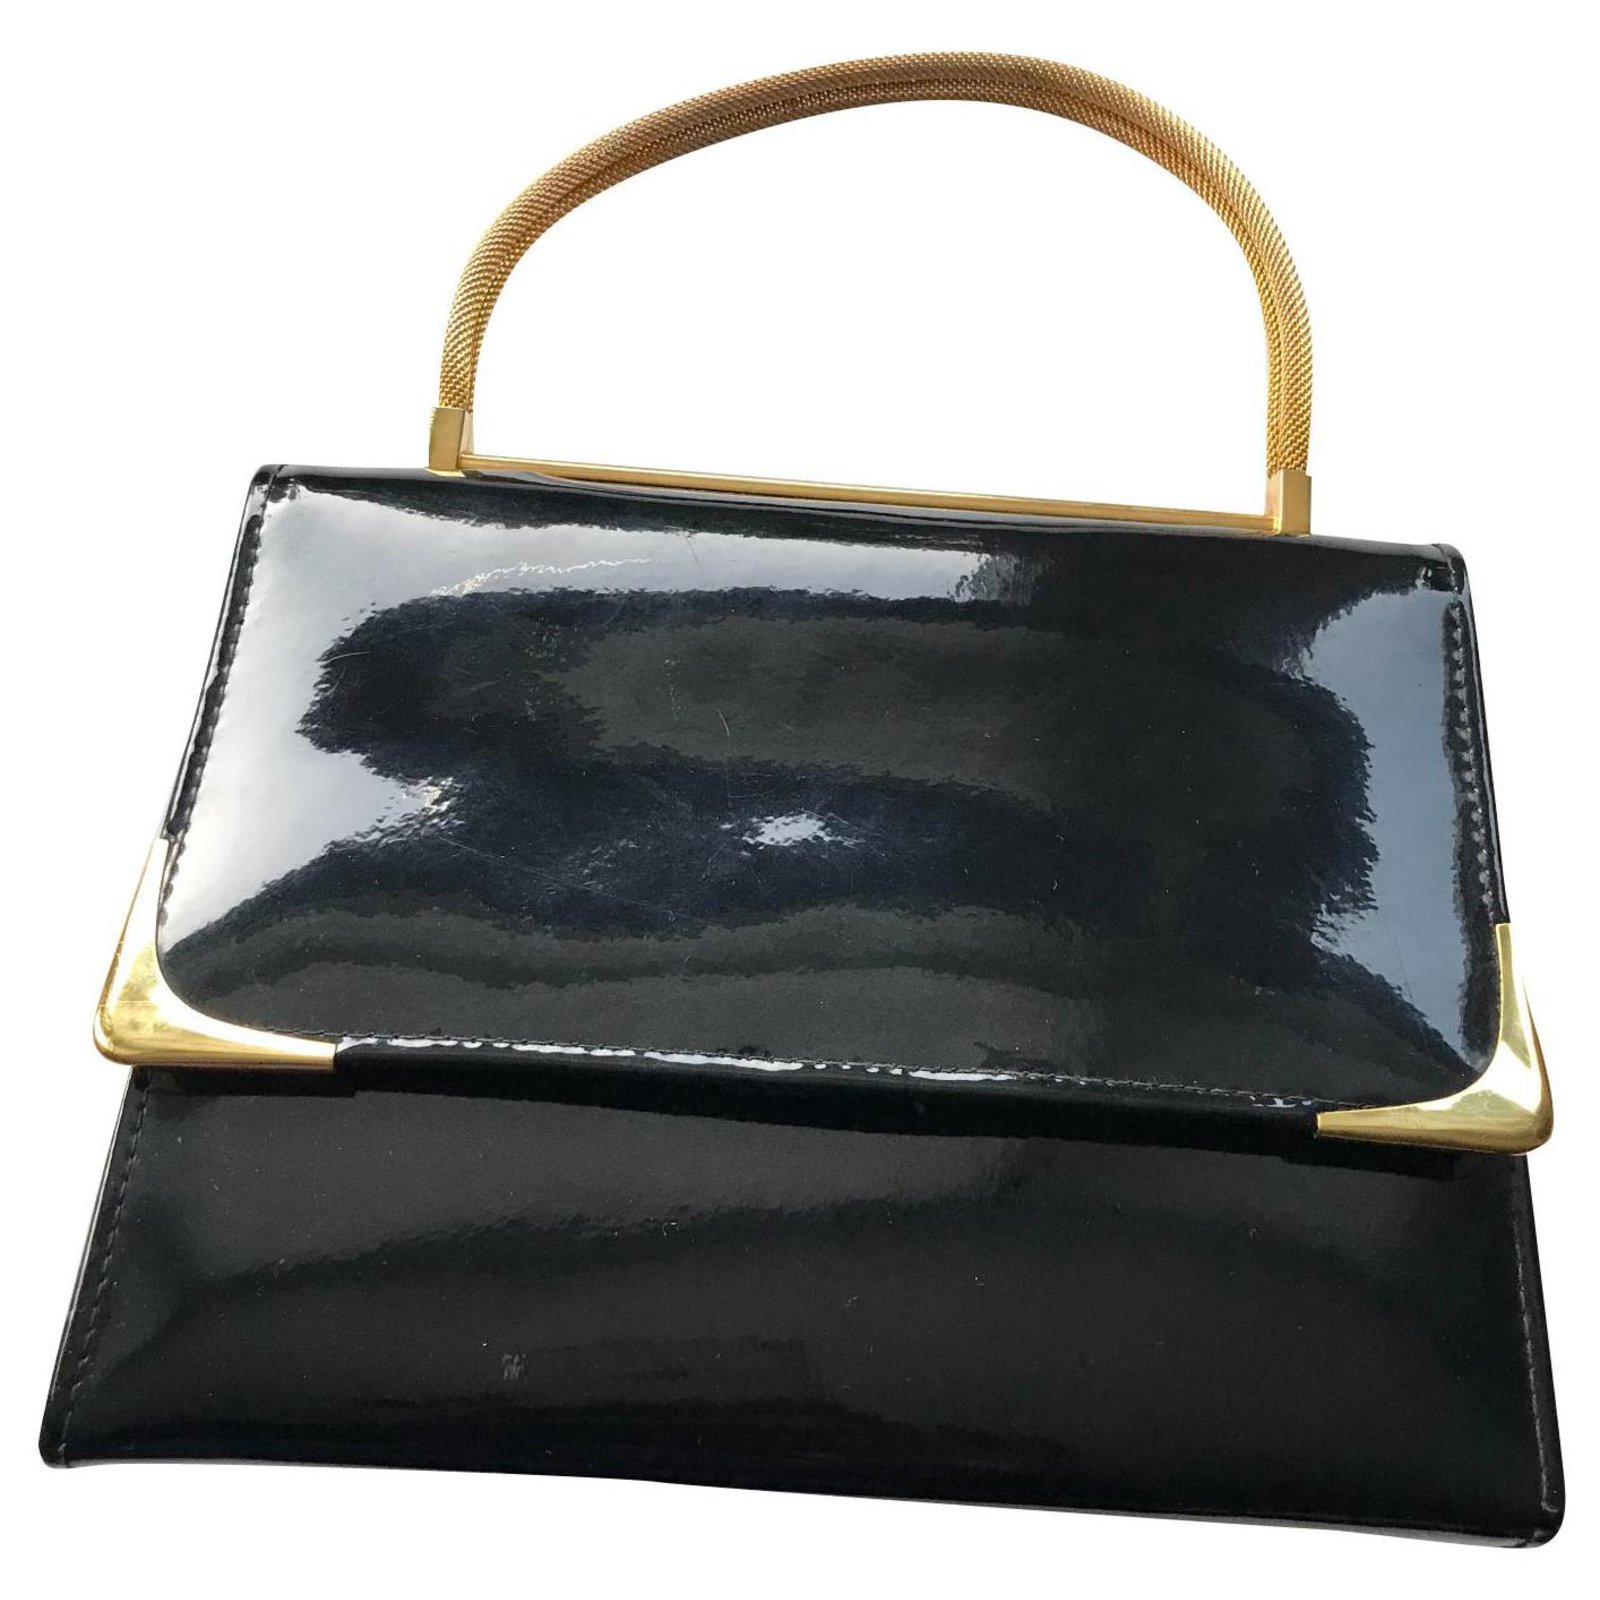 A 1960s Vintage Gucci Black Patent Leather Handbag with Gold Hardware